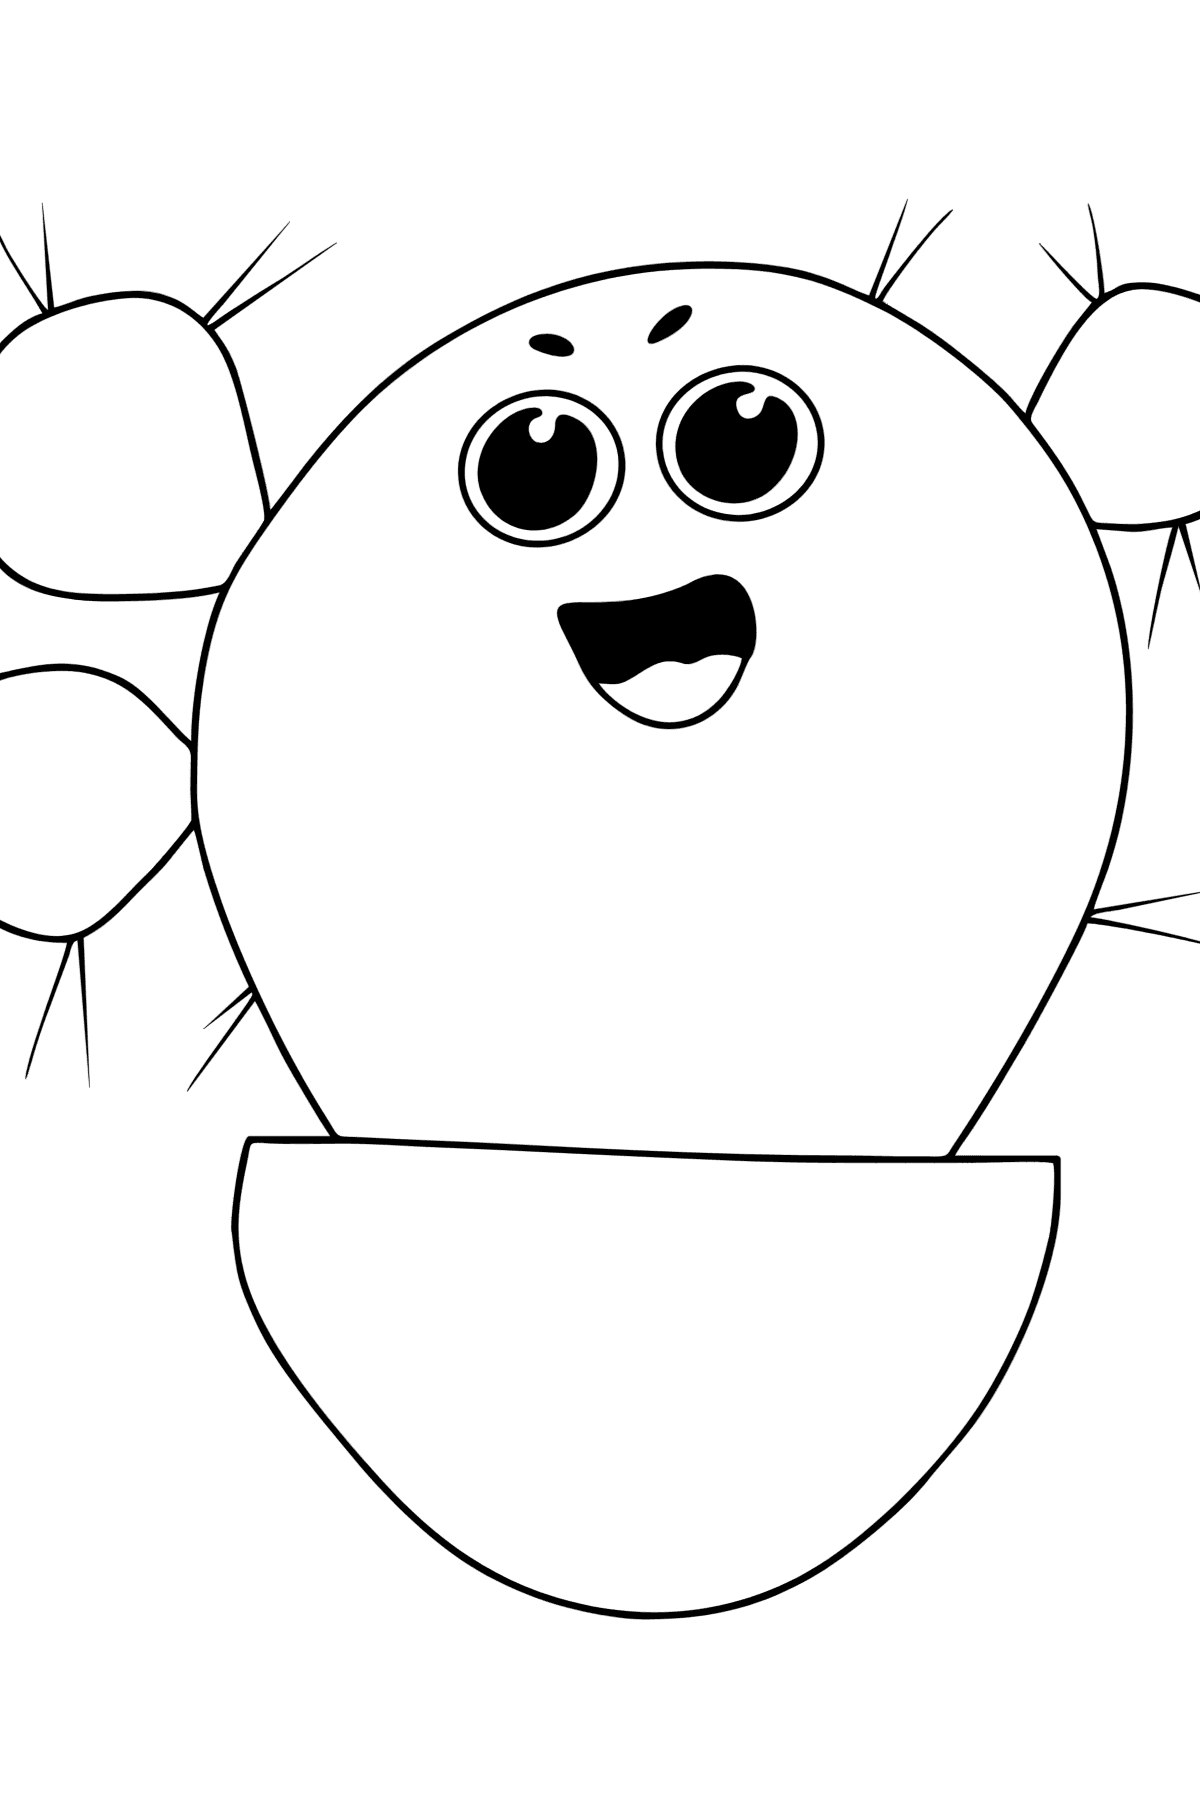 Opuntia with Eyes coloring page - Coloring Pages for Kids